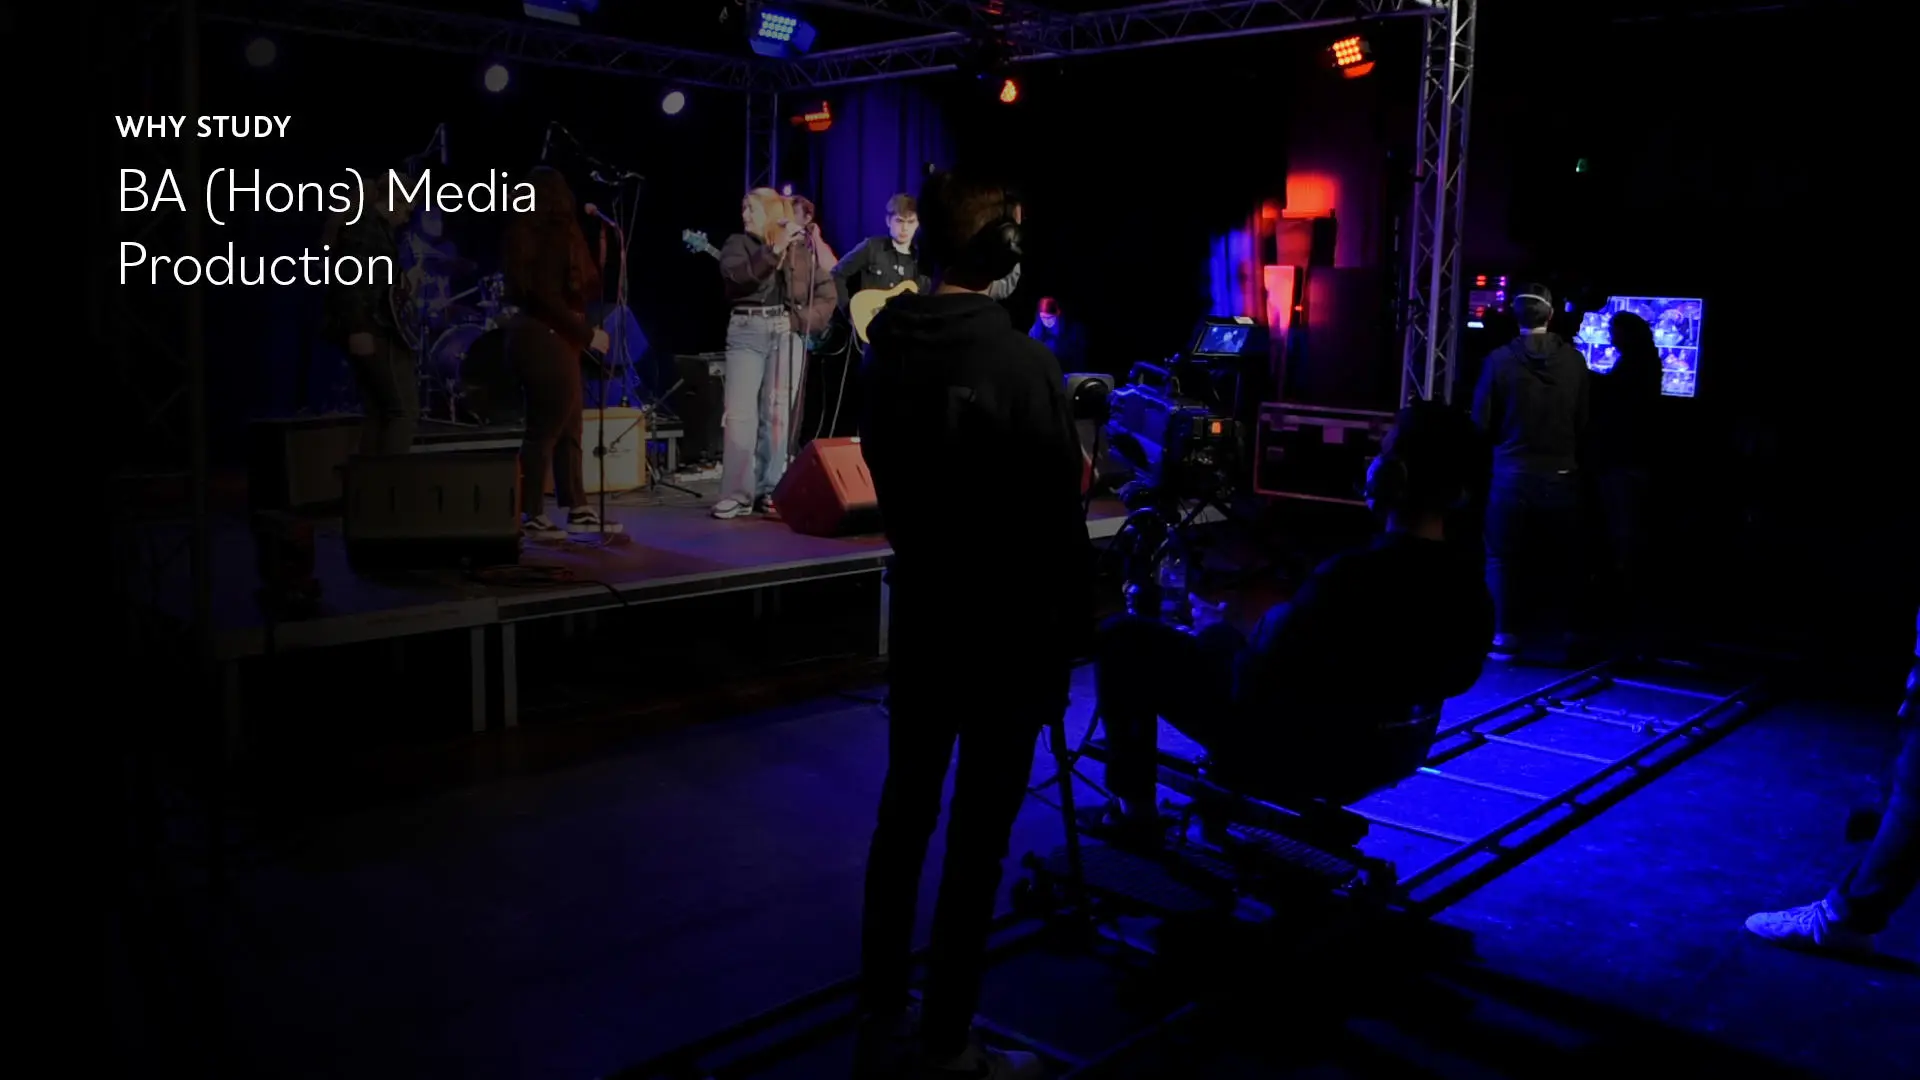 Students in the production studio filming a music video. Cameraman and floor manager. Text reads 'Why study BA (Hons) Media Production'"